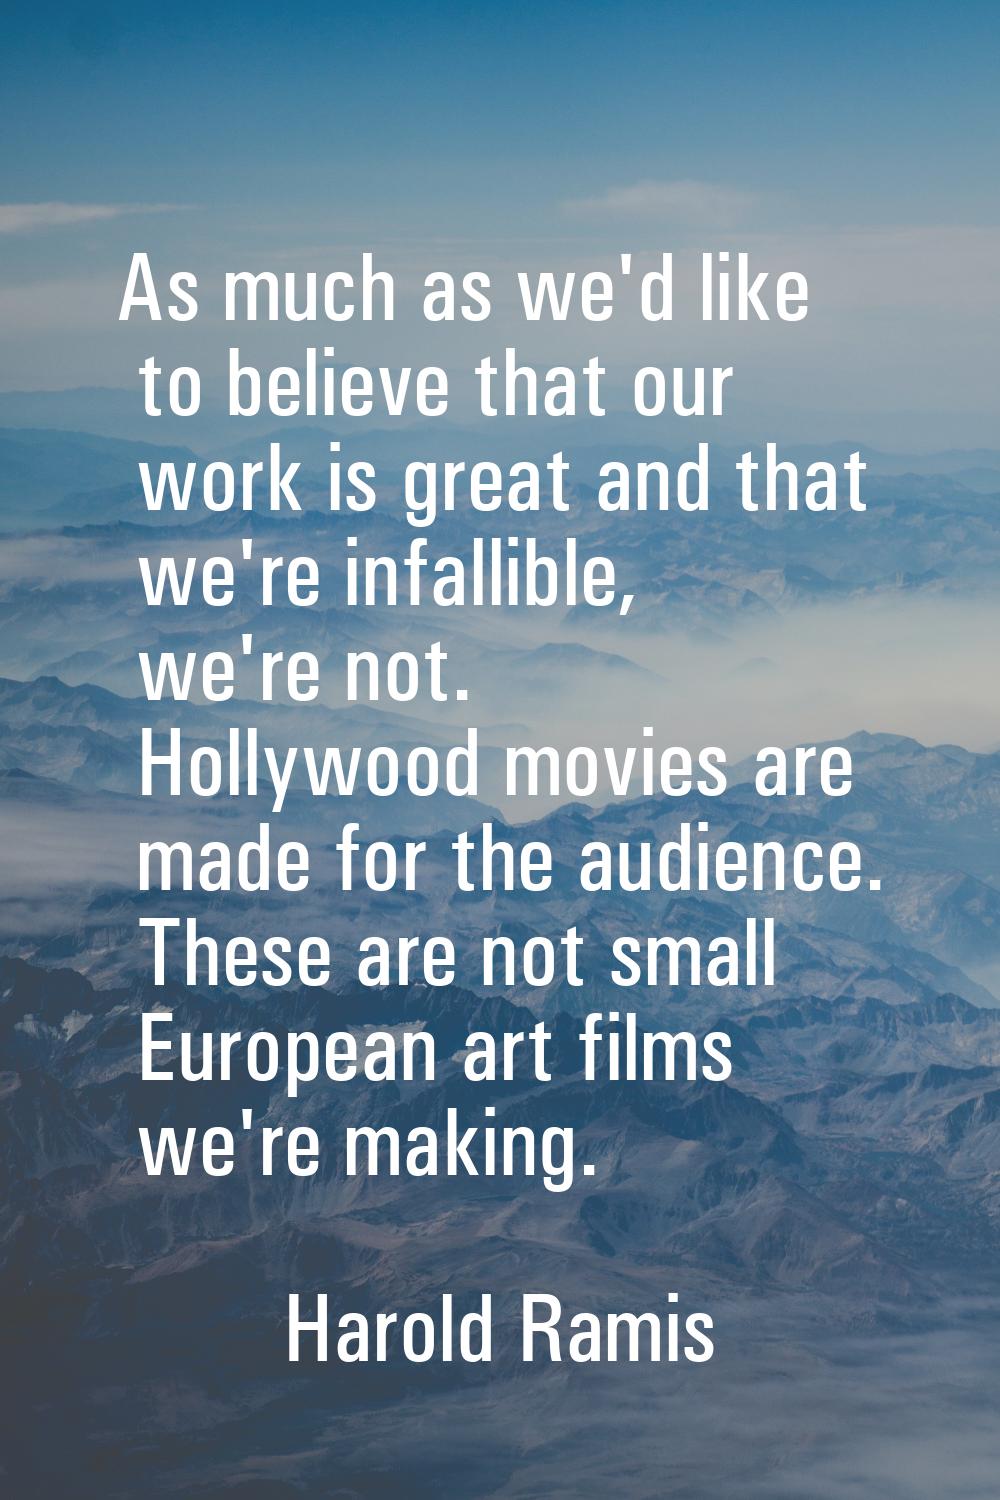 As much as we'd like to believe that our work is great and that we're infallible, we're not. Hollyw